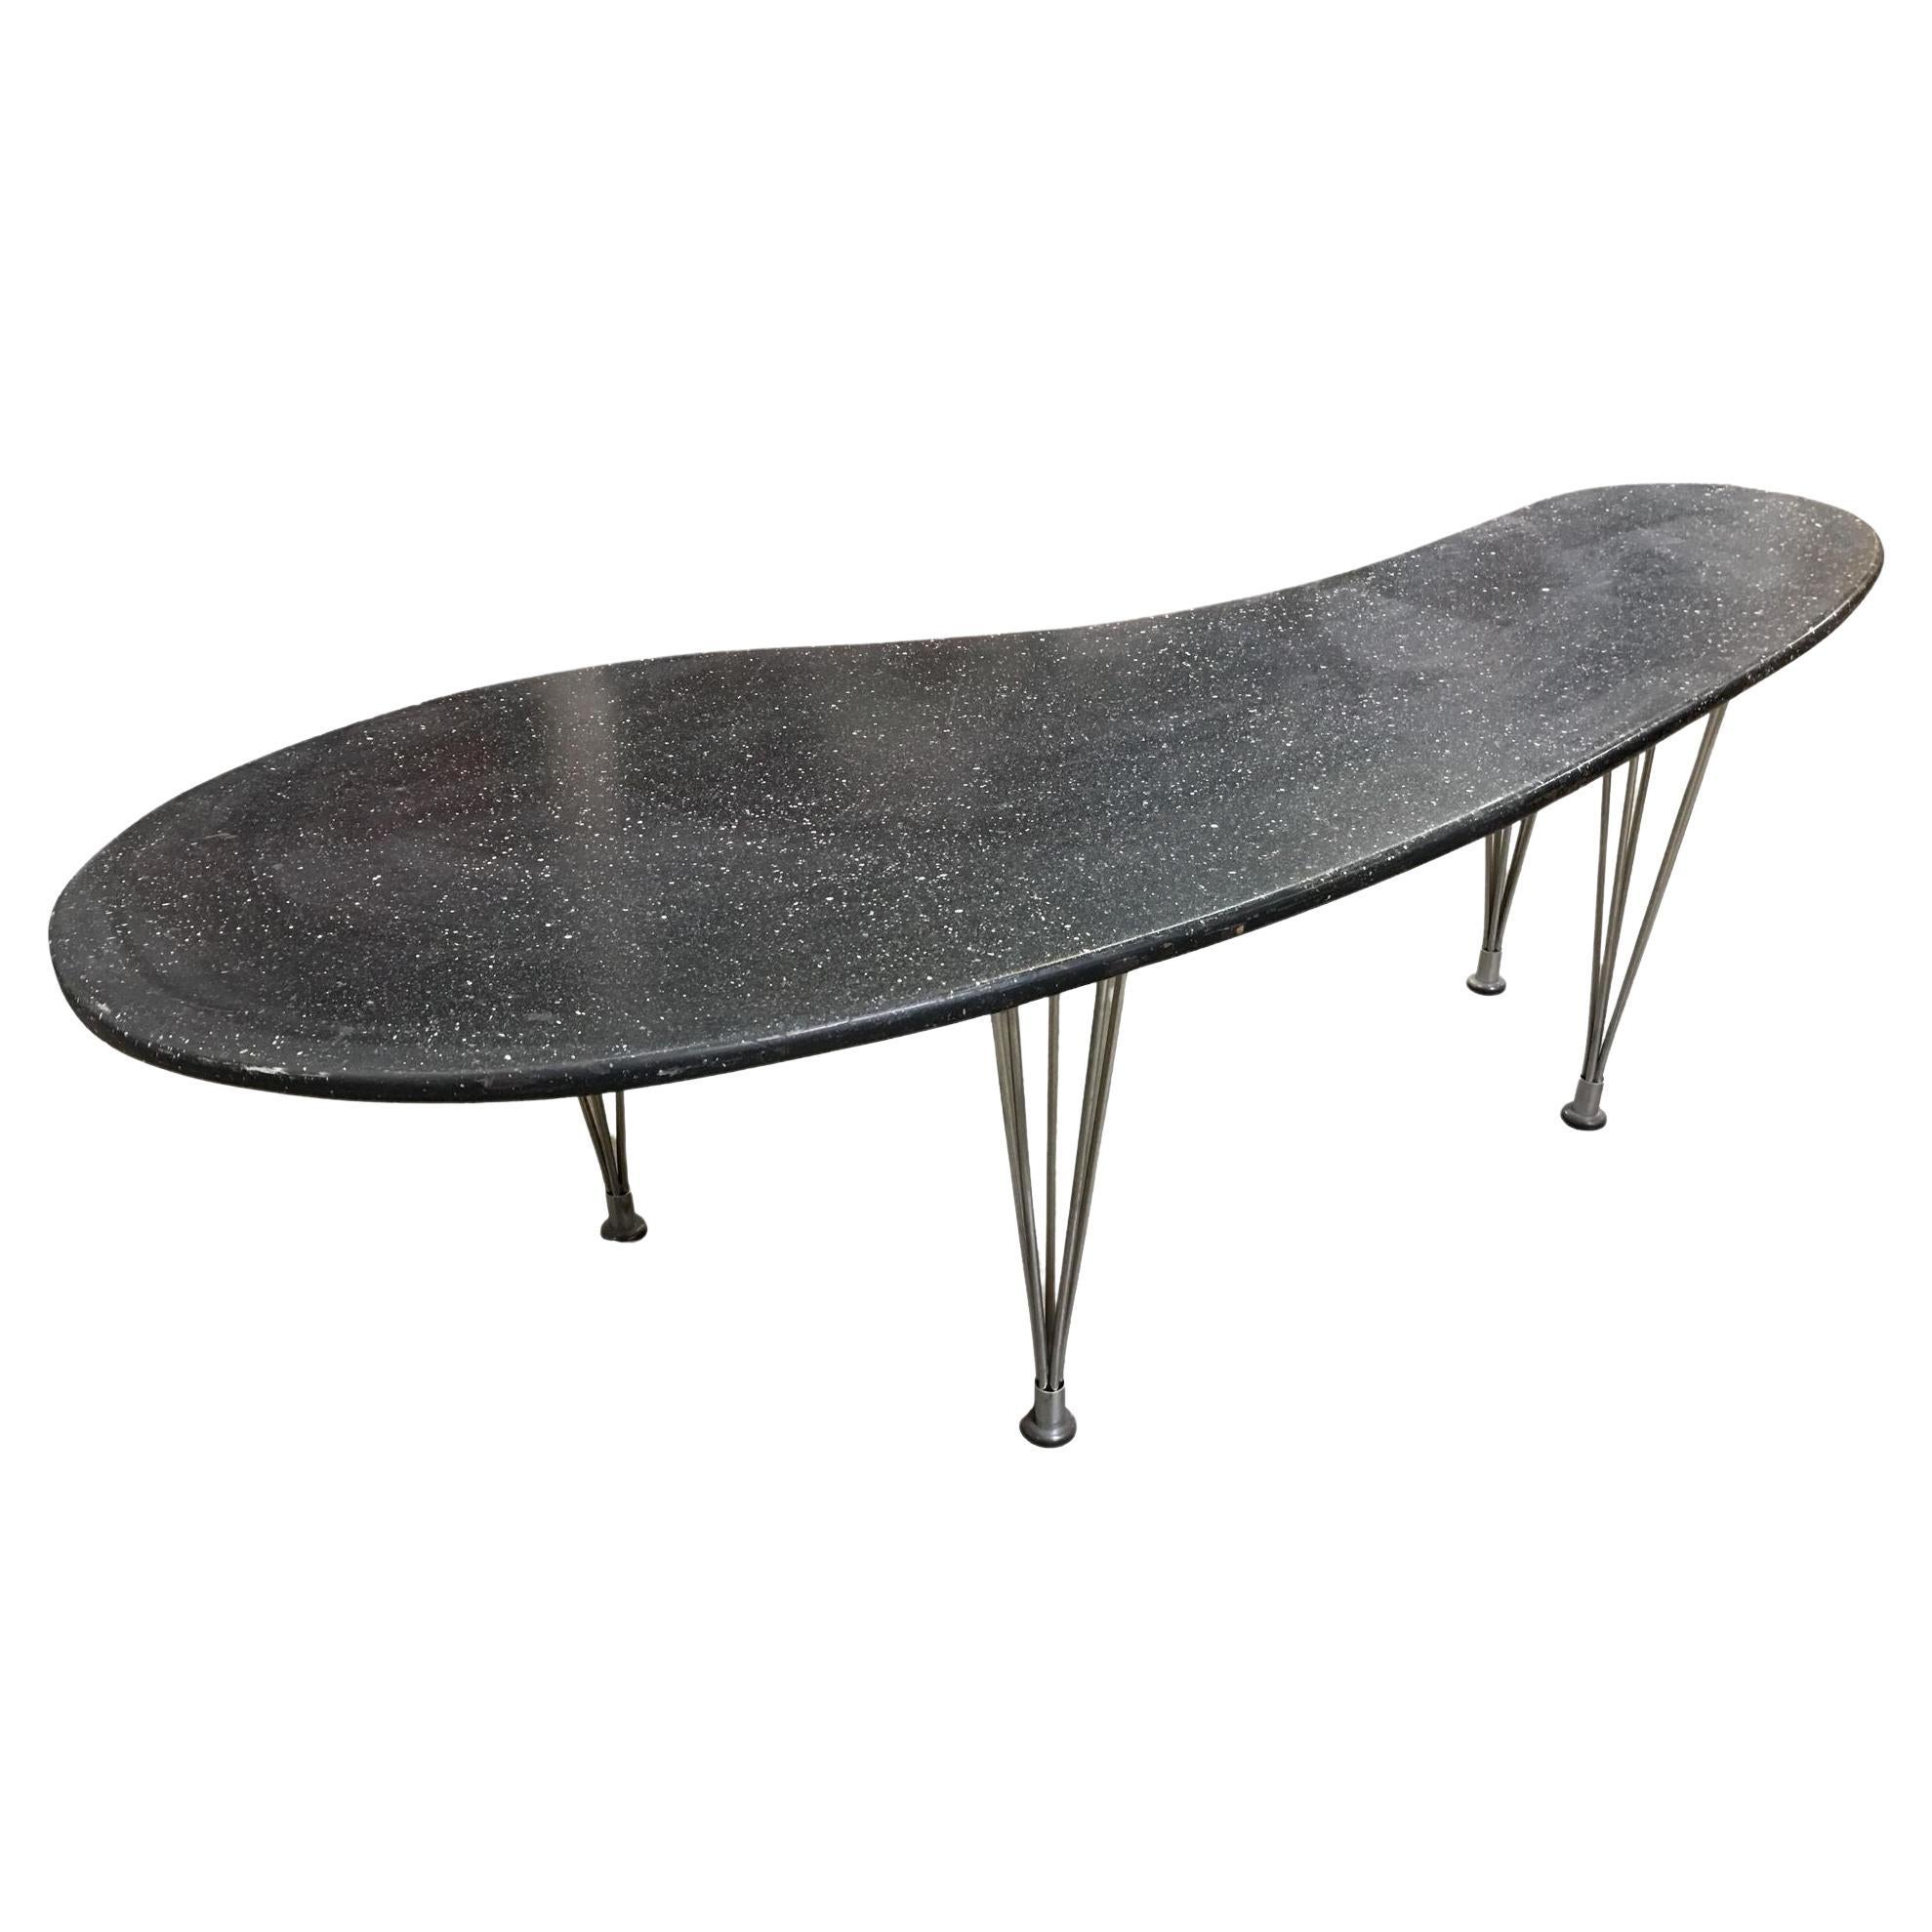 Large 67" Mid-Century Bruno Mathsson Biomorphic Coffee Table w/ Wire Spoke Legs For Sale